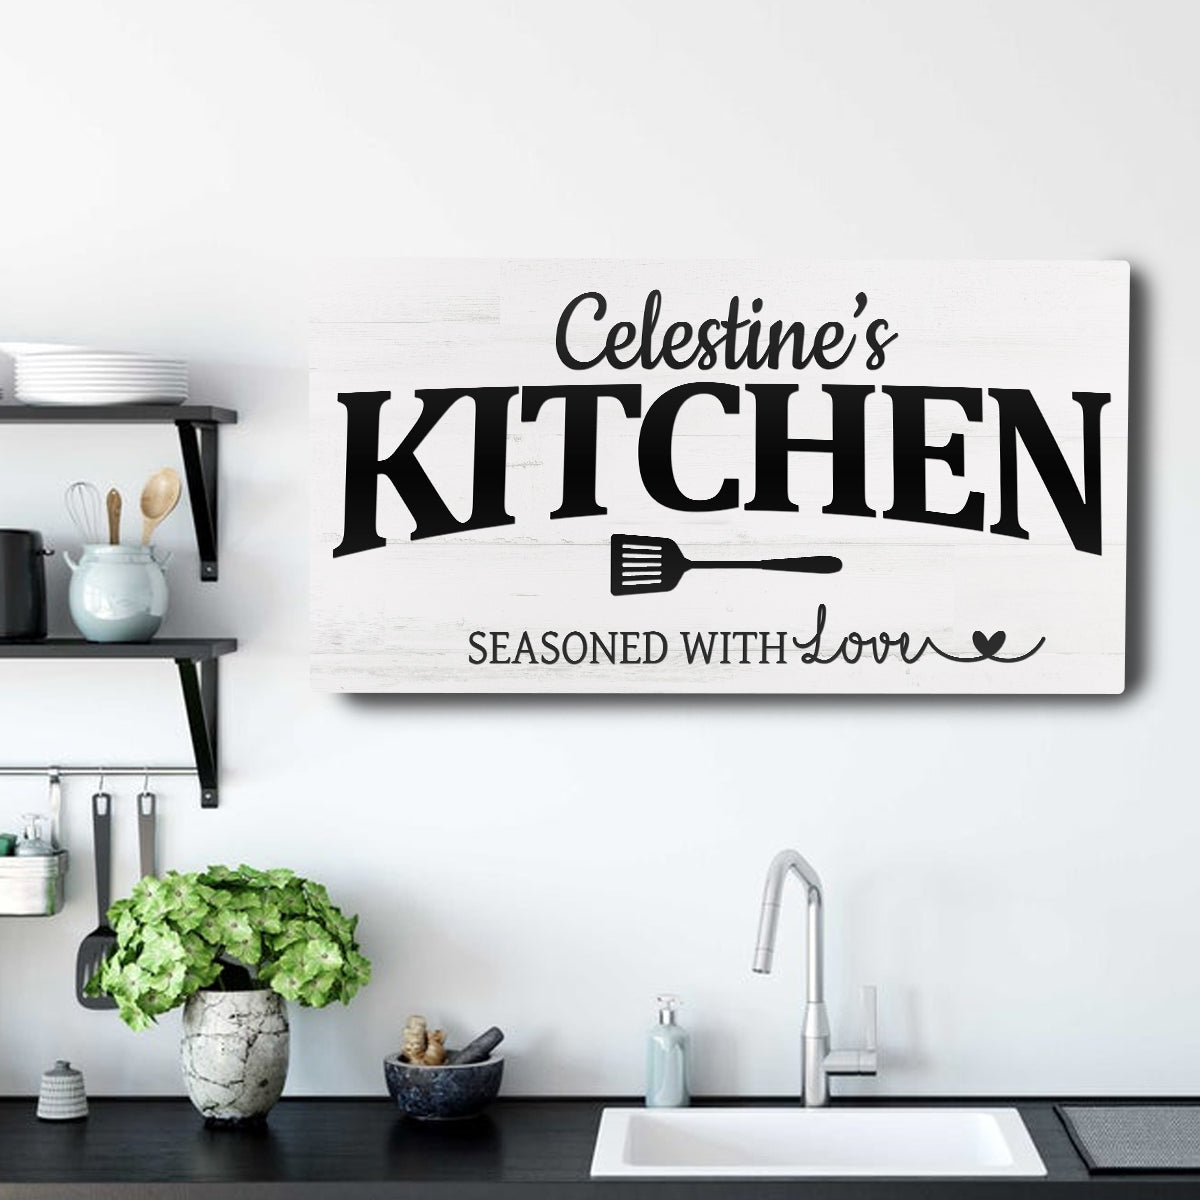 Your Kitchen Sign - Image by Tailored Canvases